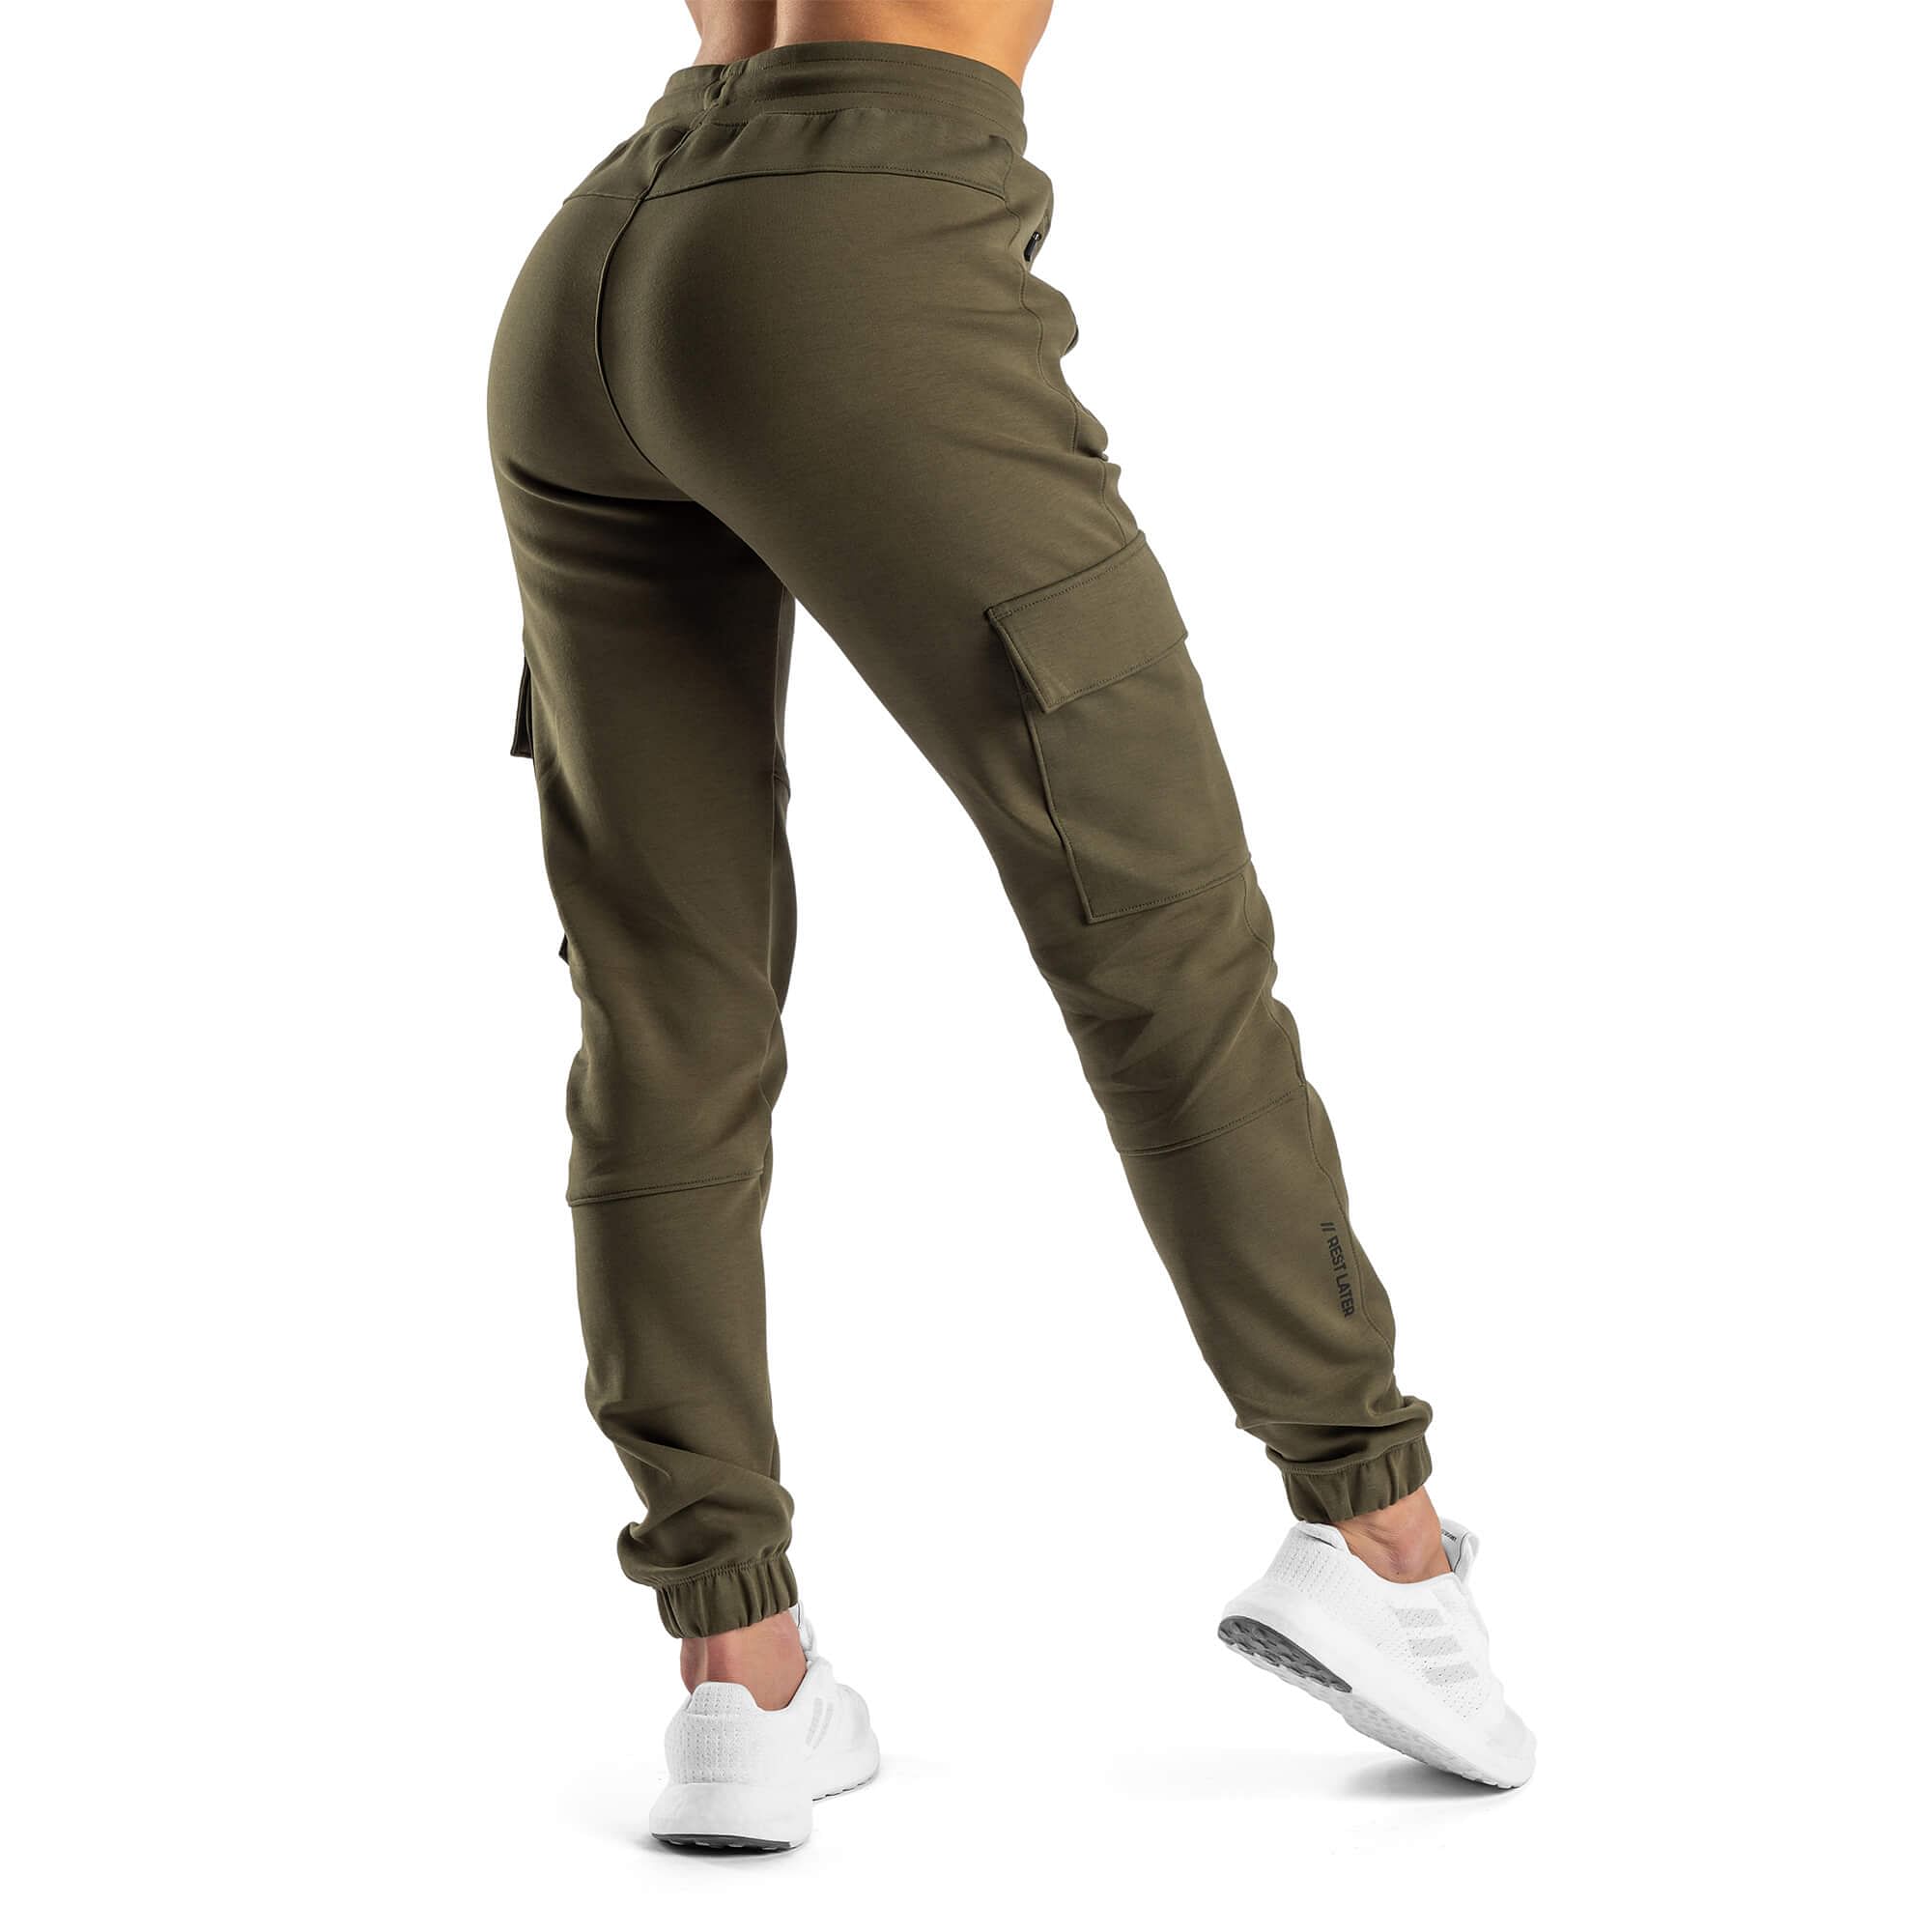 Rest Later Pants - Army Green